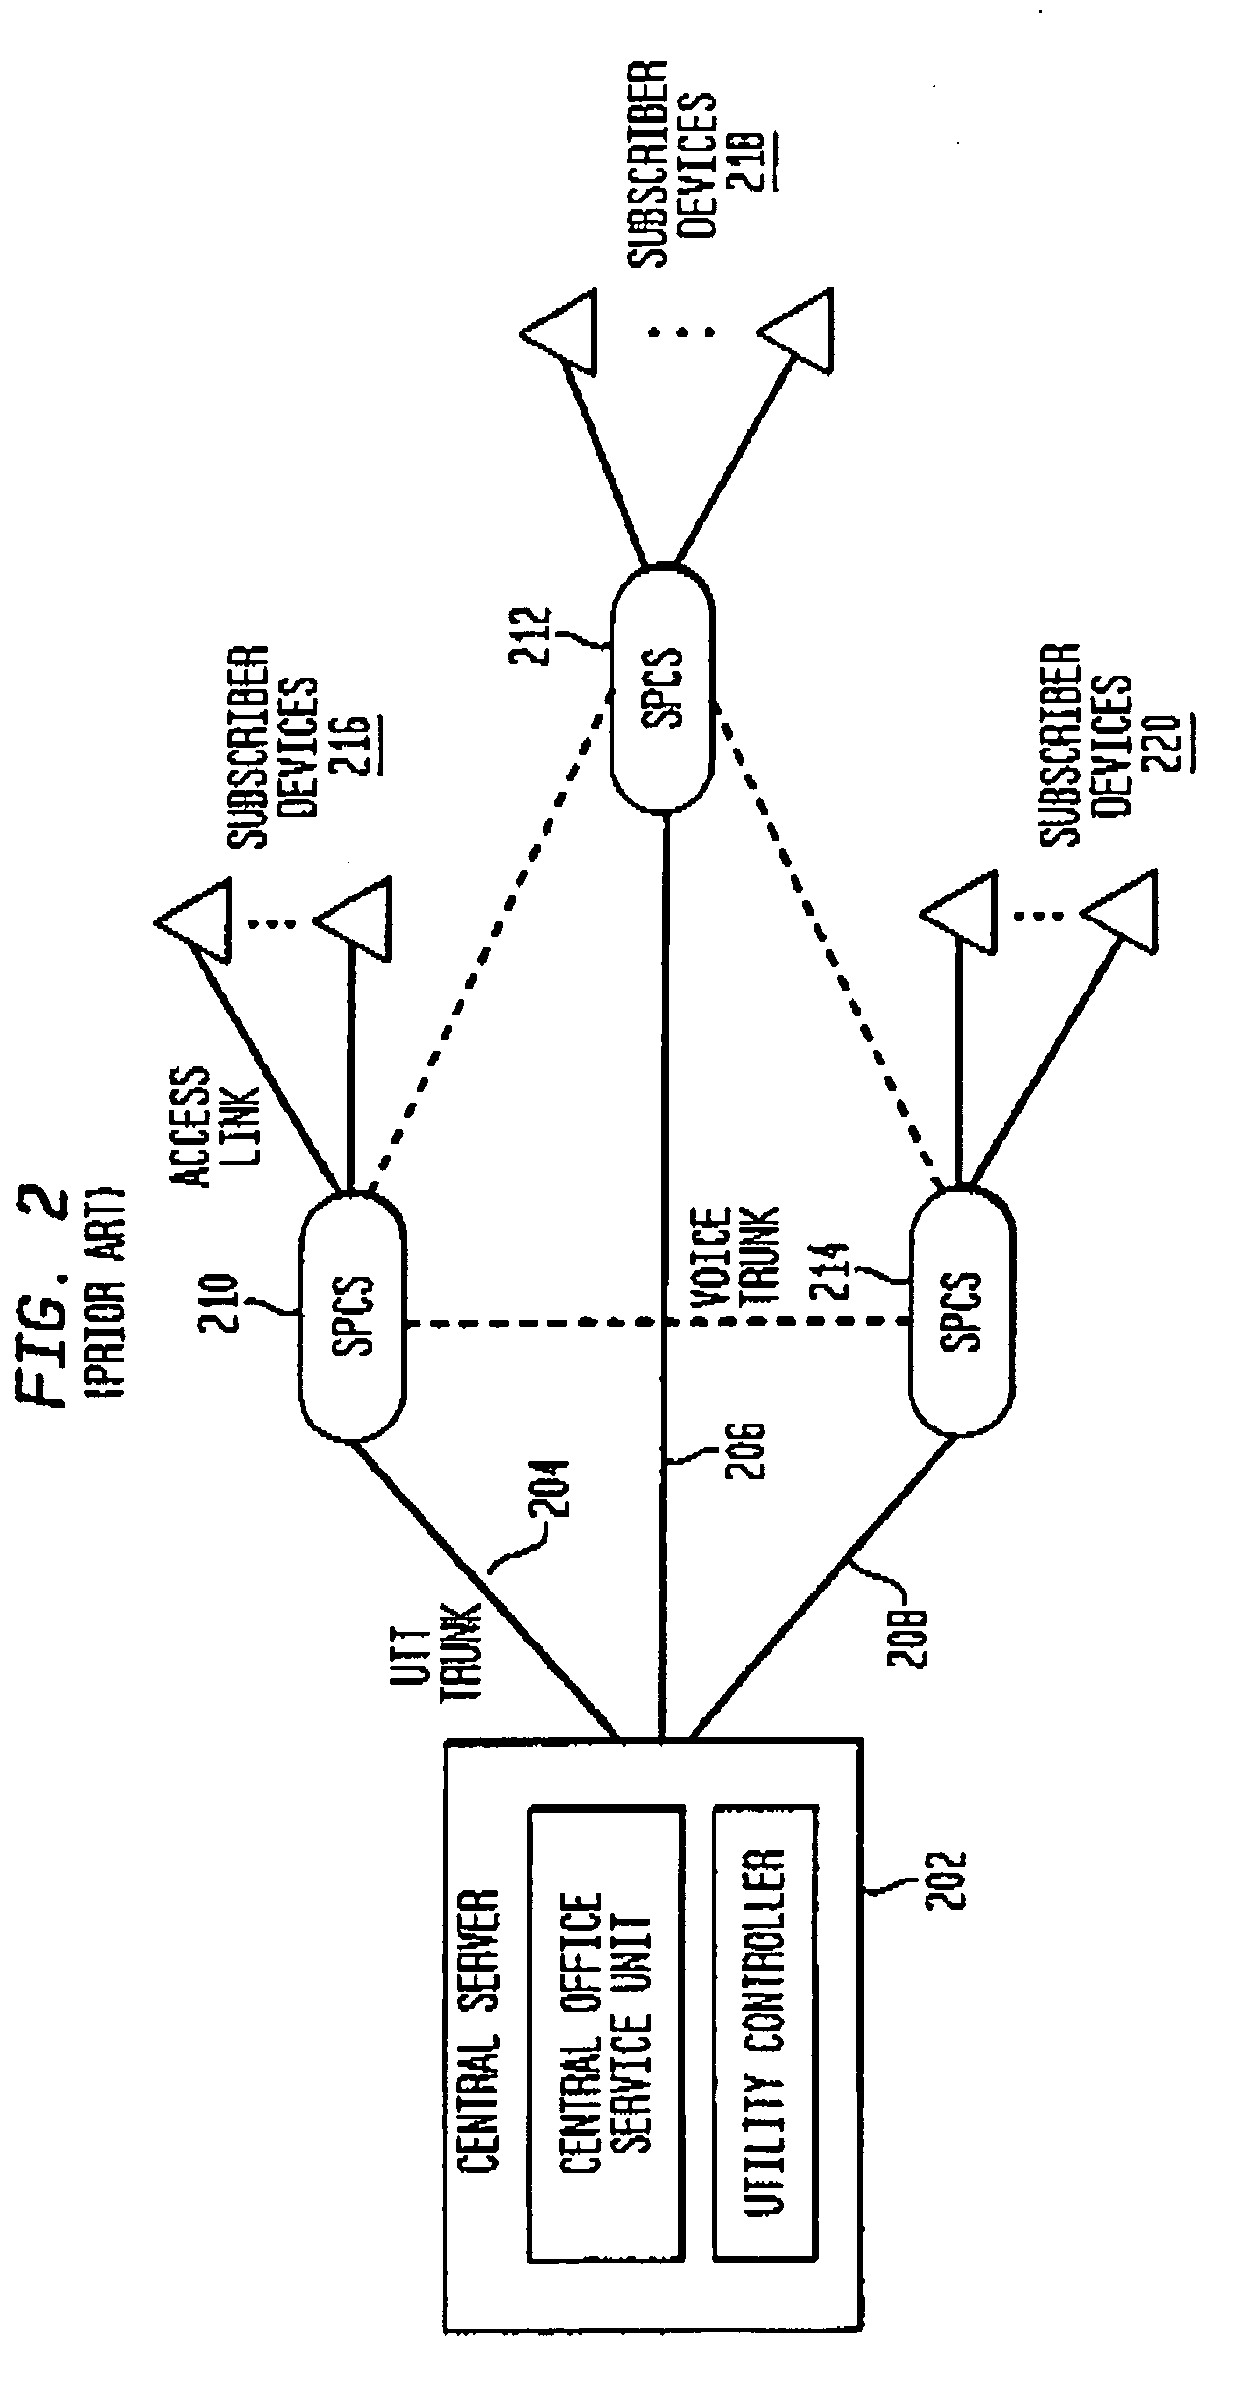 Method and system for transporting generic data messages over the public switched telephone network to customer premises equipment without establishing a call